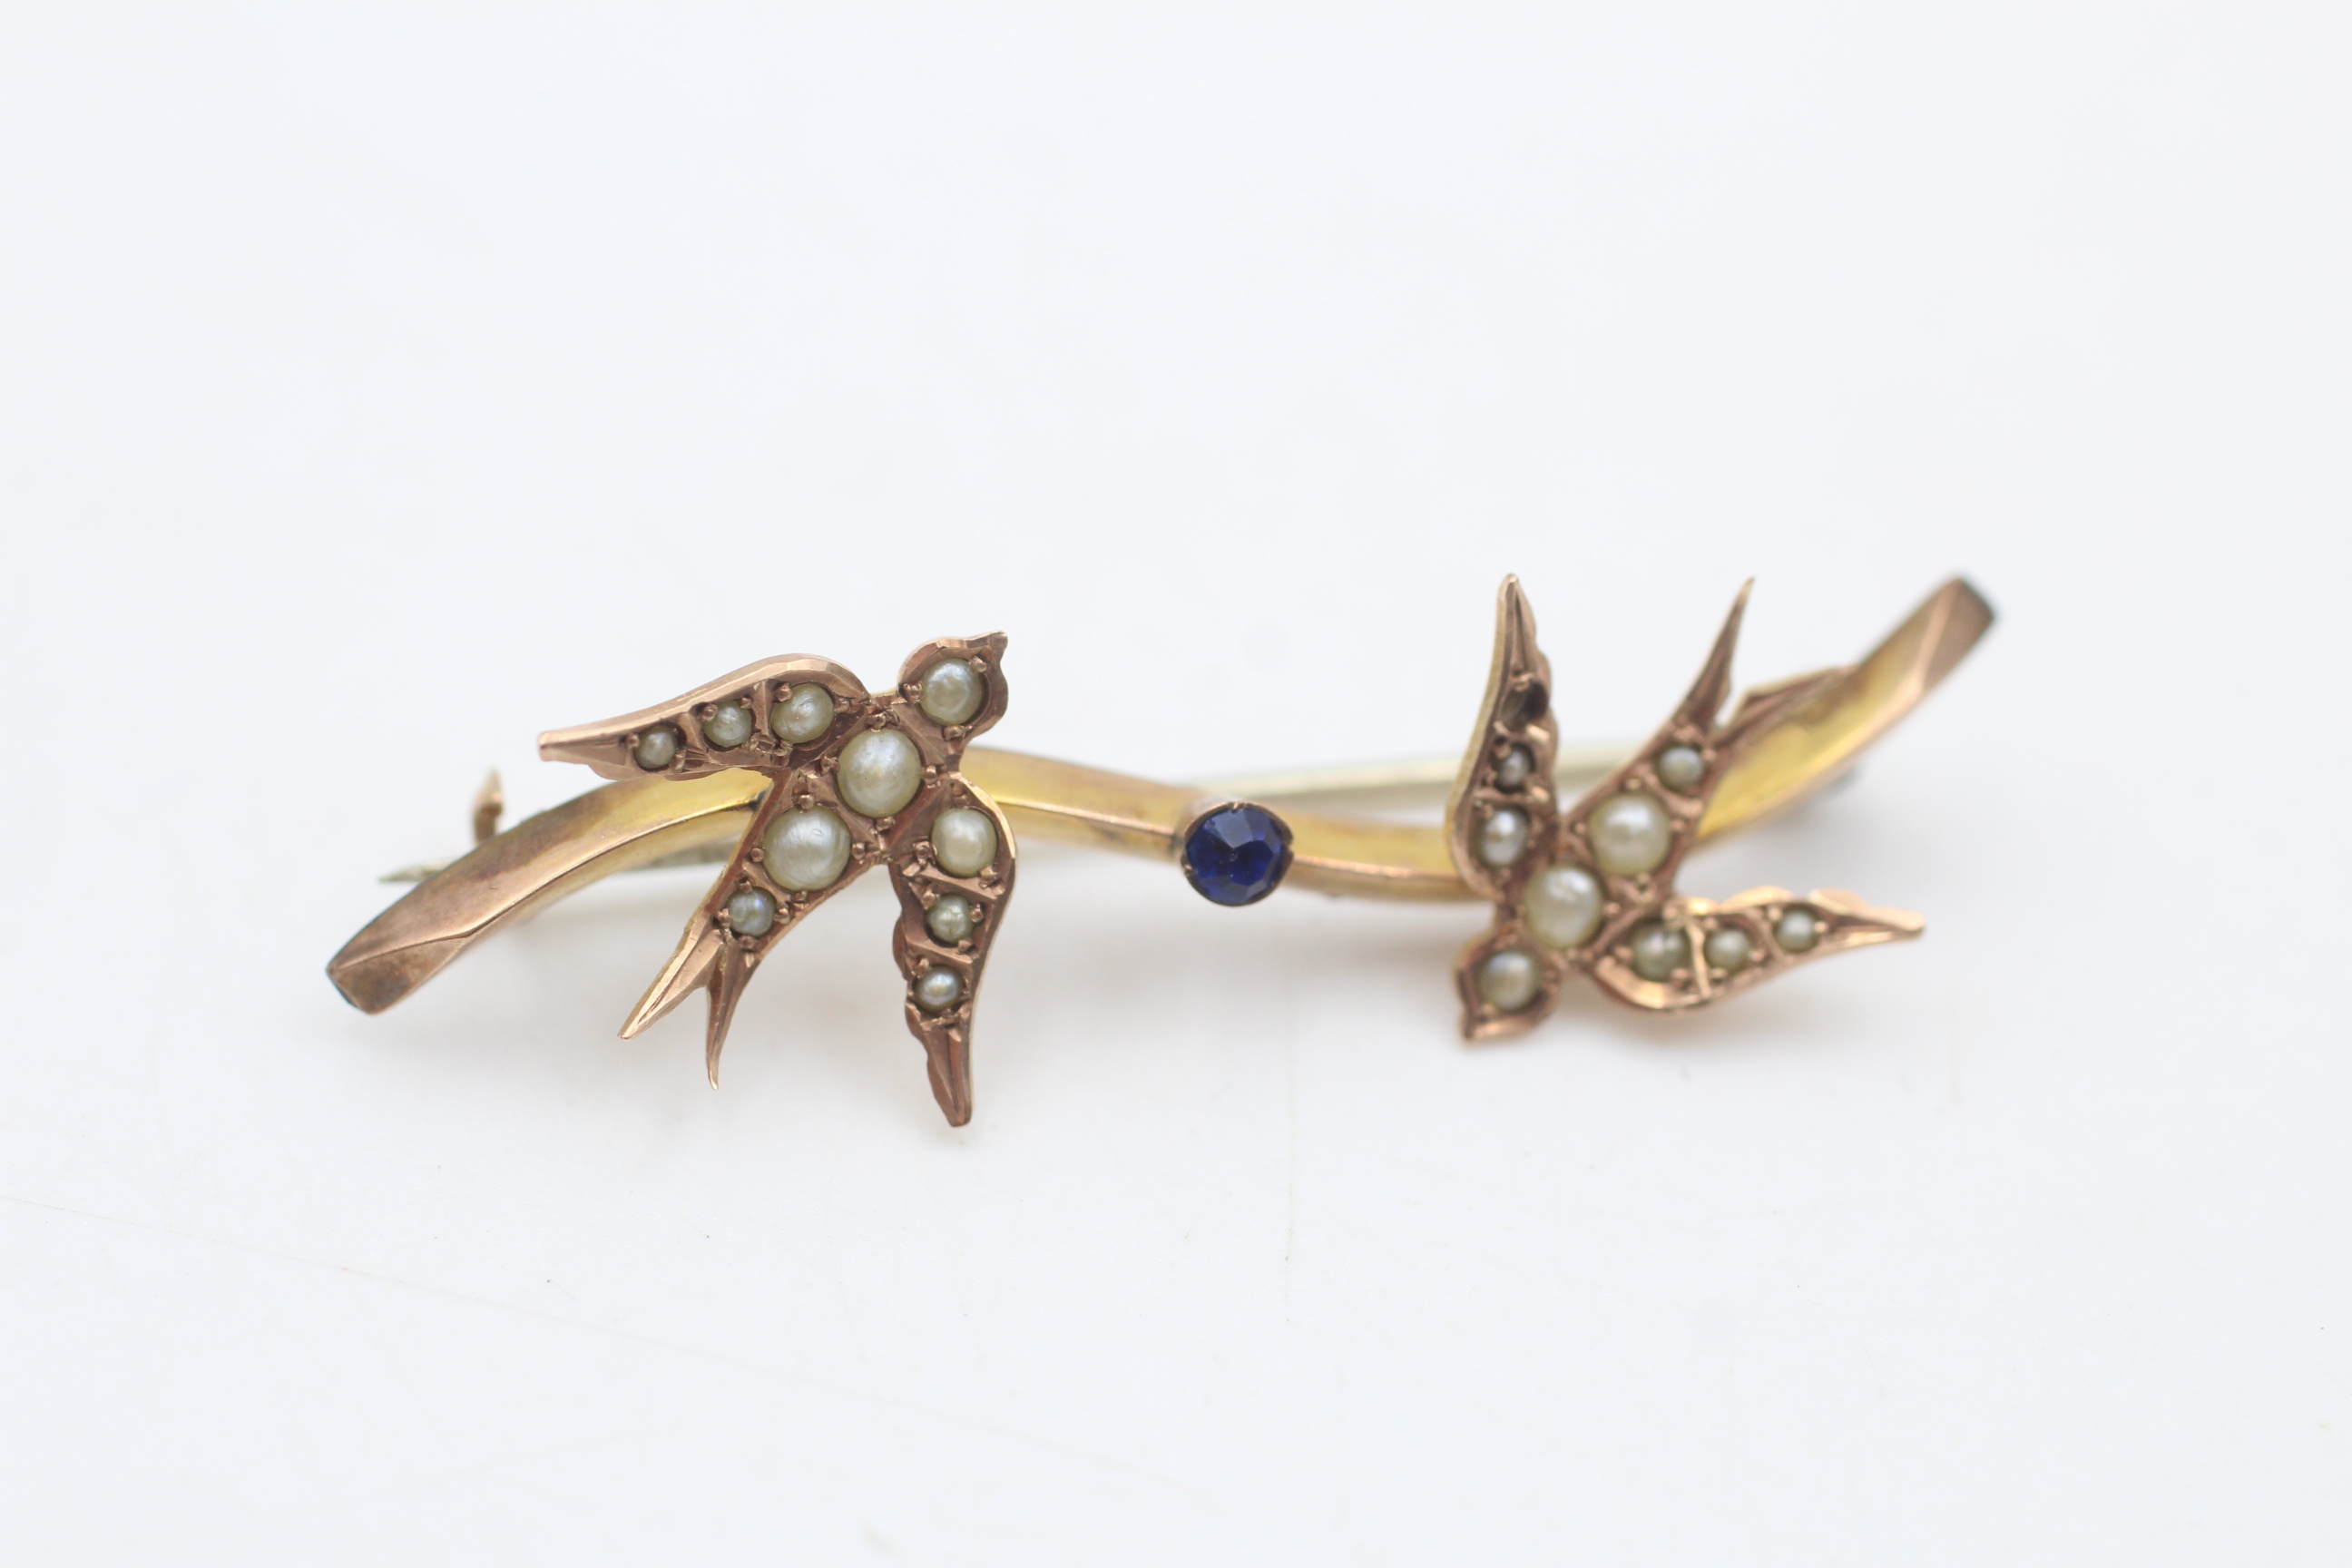 2 x 9ct gold antique swallow and floral brooches inc. seed pearl & paste - as seen (4g) - Image 2 of 4